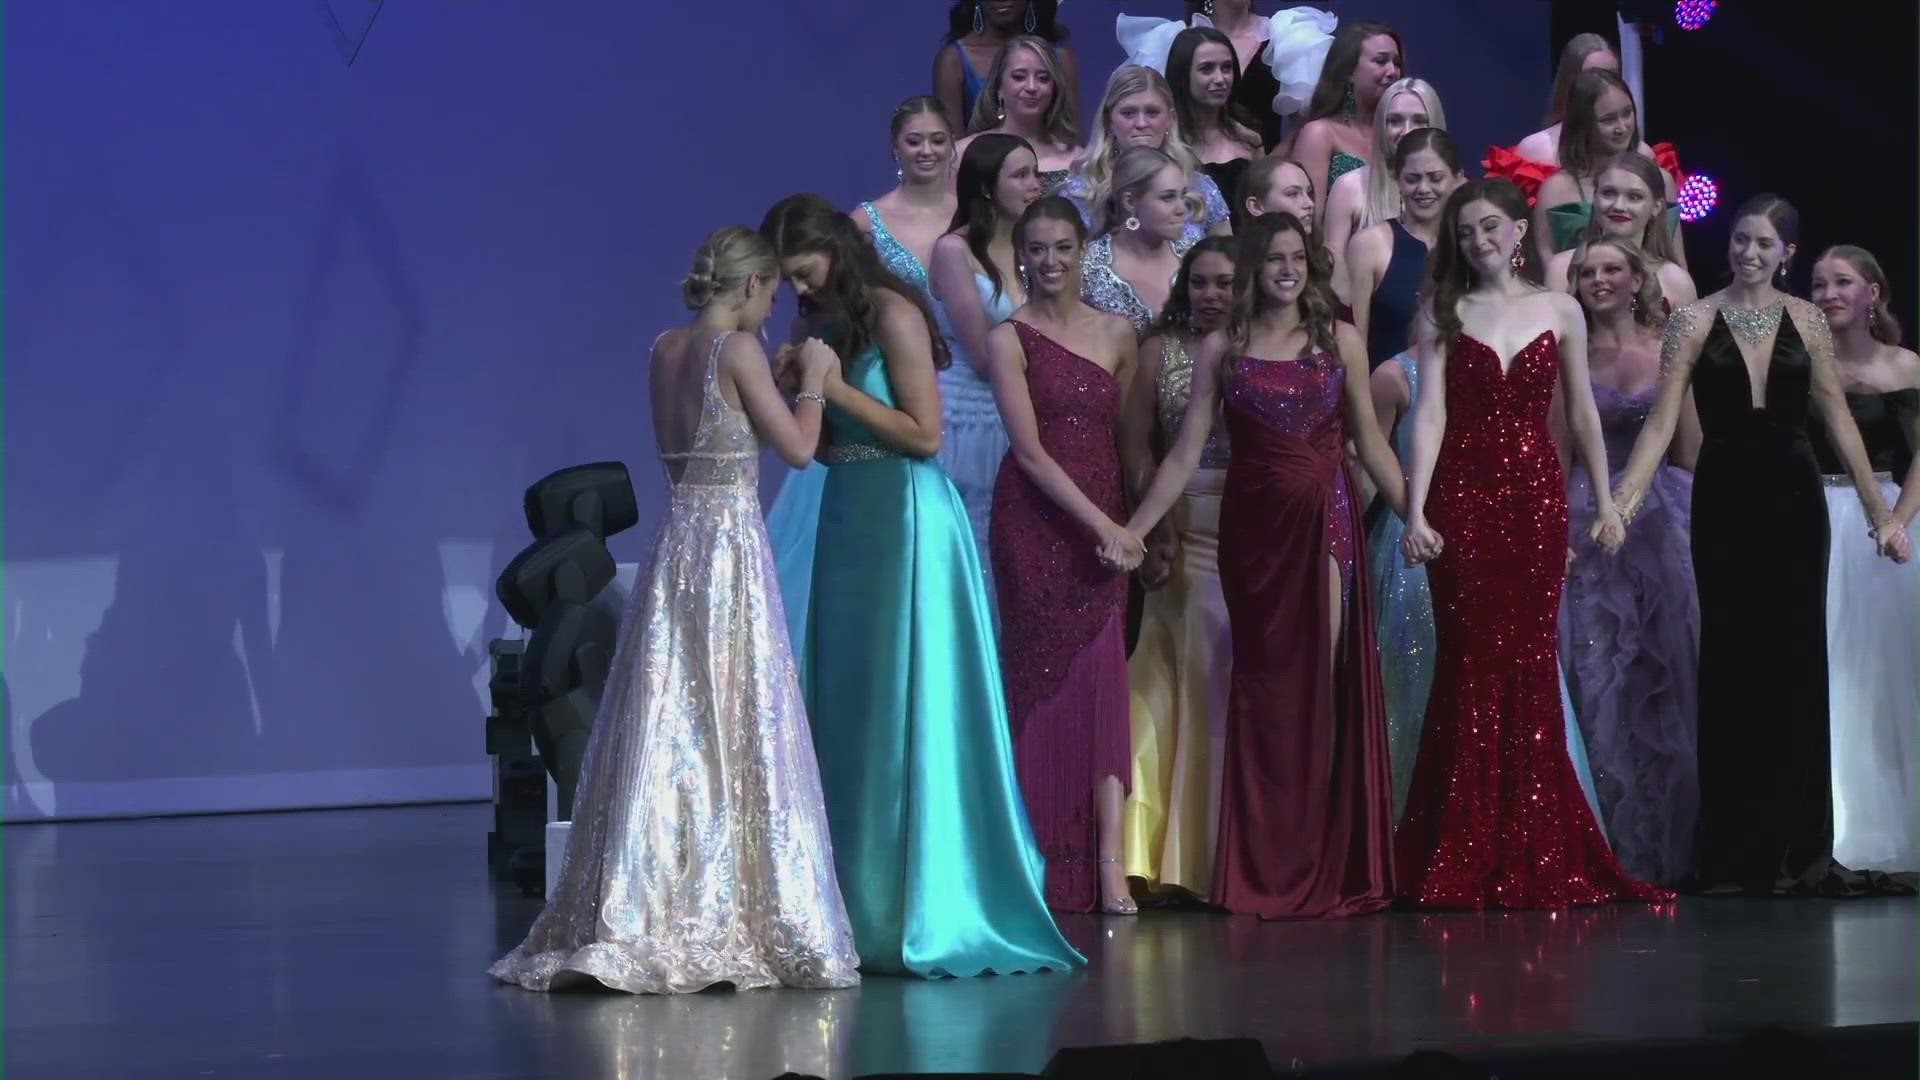 Kayla Patterson, formerly Miss Duneland's Outstanding Teen, was crowned Miss Indiana's Outstanding Teen on Saturday.